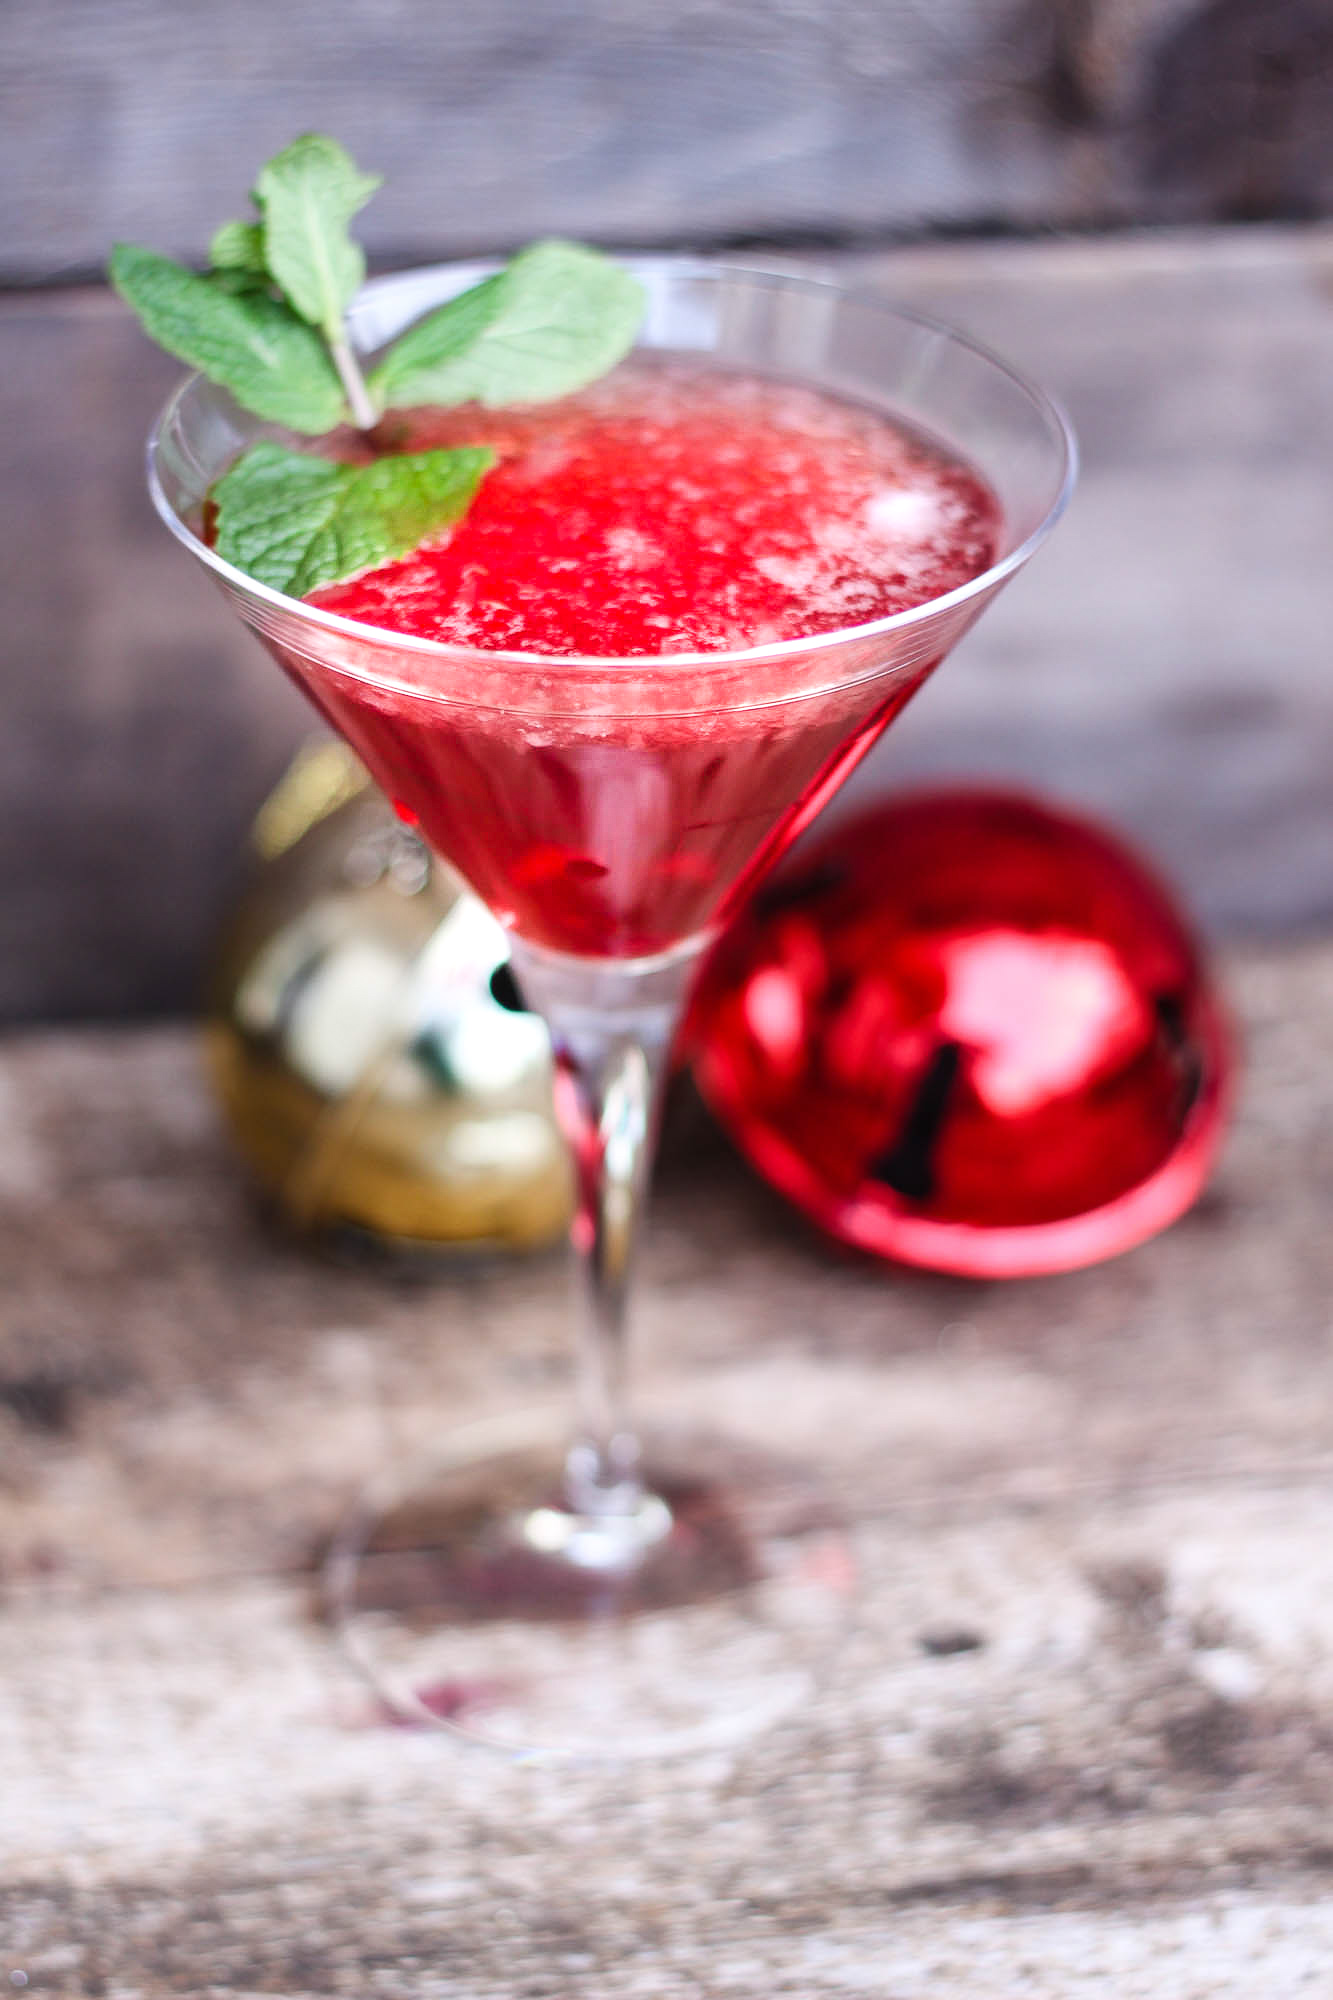 Recipe: How to Make Pomegranate Agave Martini. You can make this drink during any time of the year and it will be just as delicious! This drink is perfect for that hot Summer week or to cozy up and watch a Hallmark Holiday movie, try it, love it, make it a party! #Holidaydrink #Partydrinks #drinkrecipe